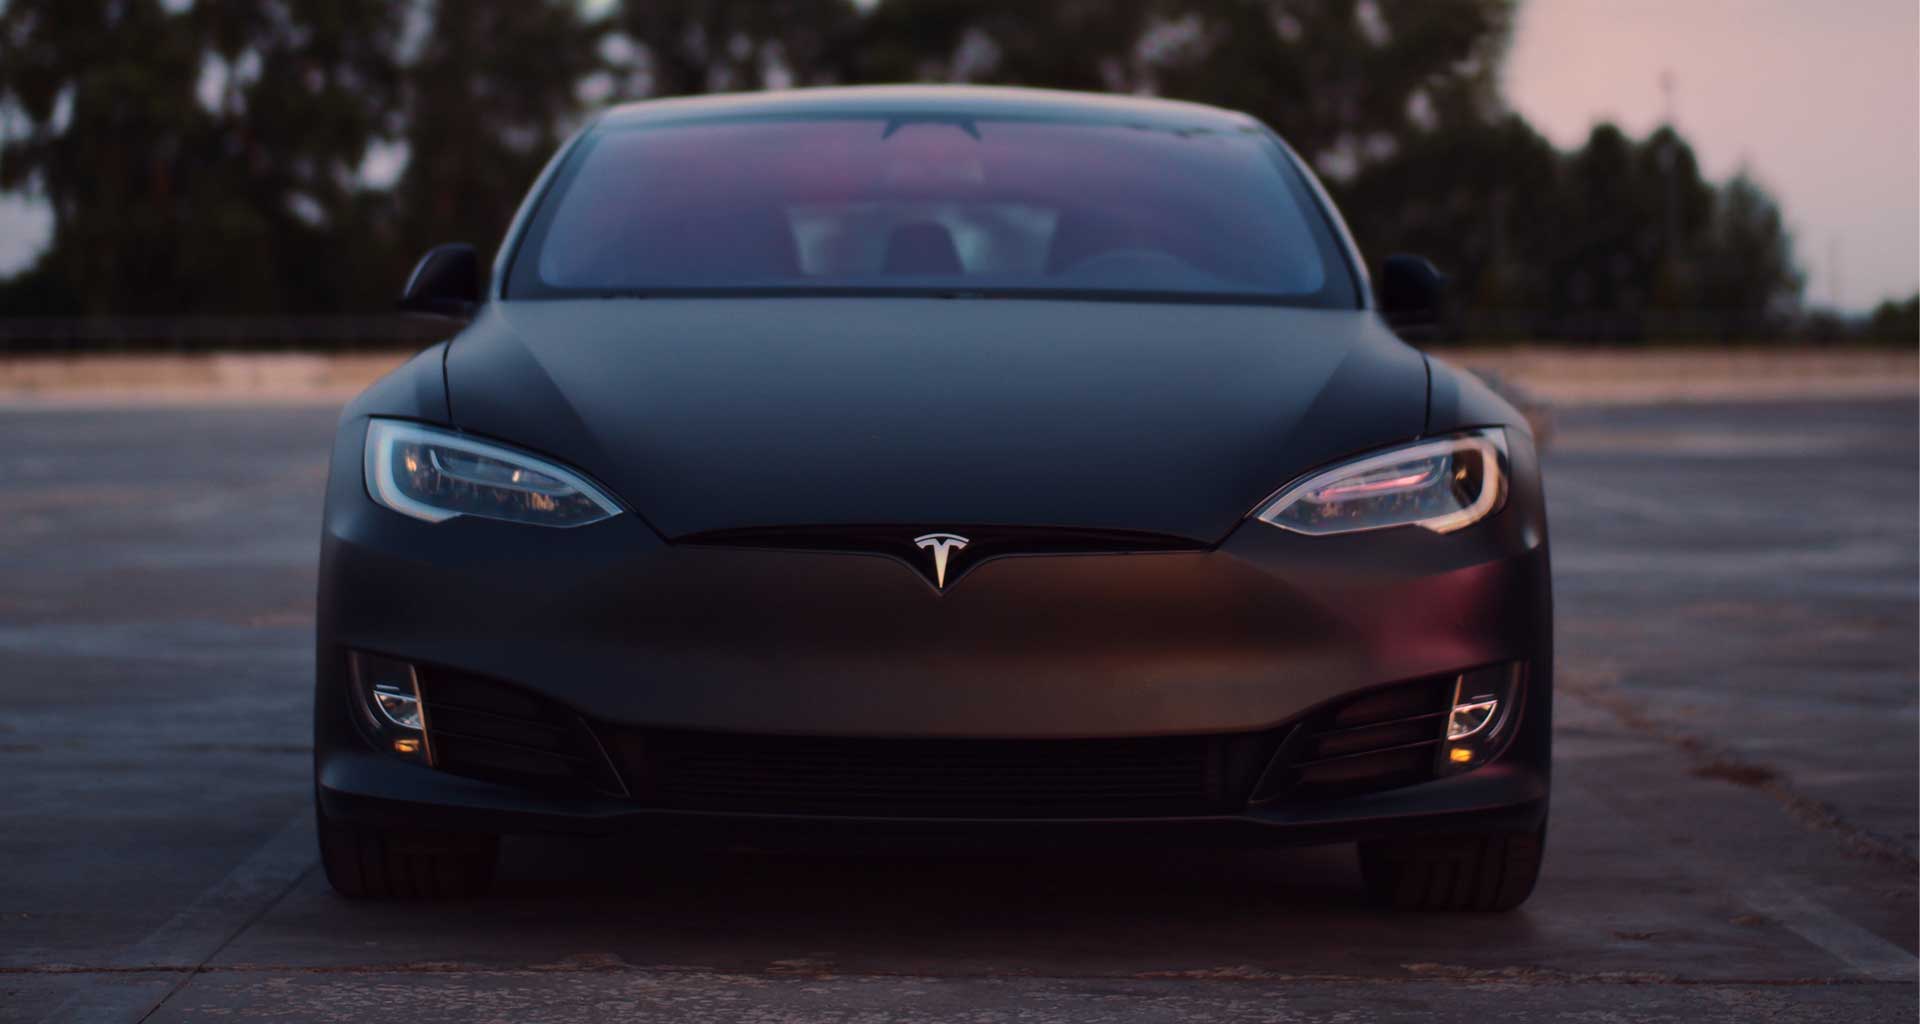 Why the Tesla Model S is the Nicest and Fastest Car I’ve Ever Sat In